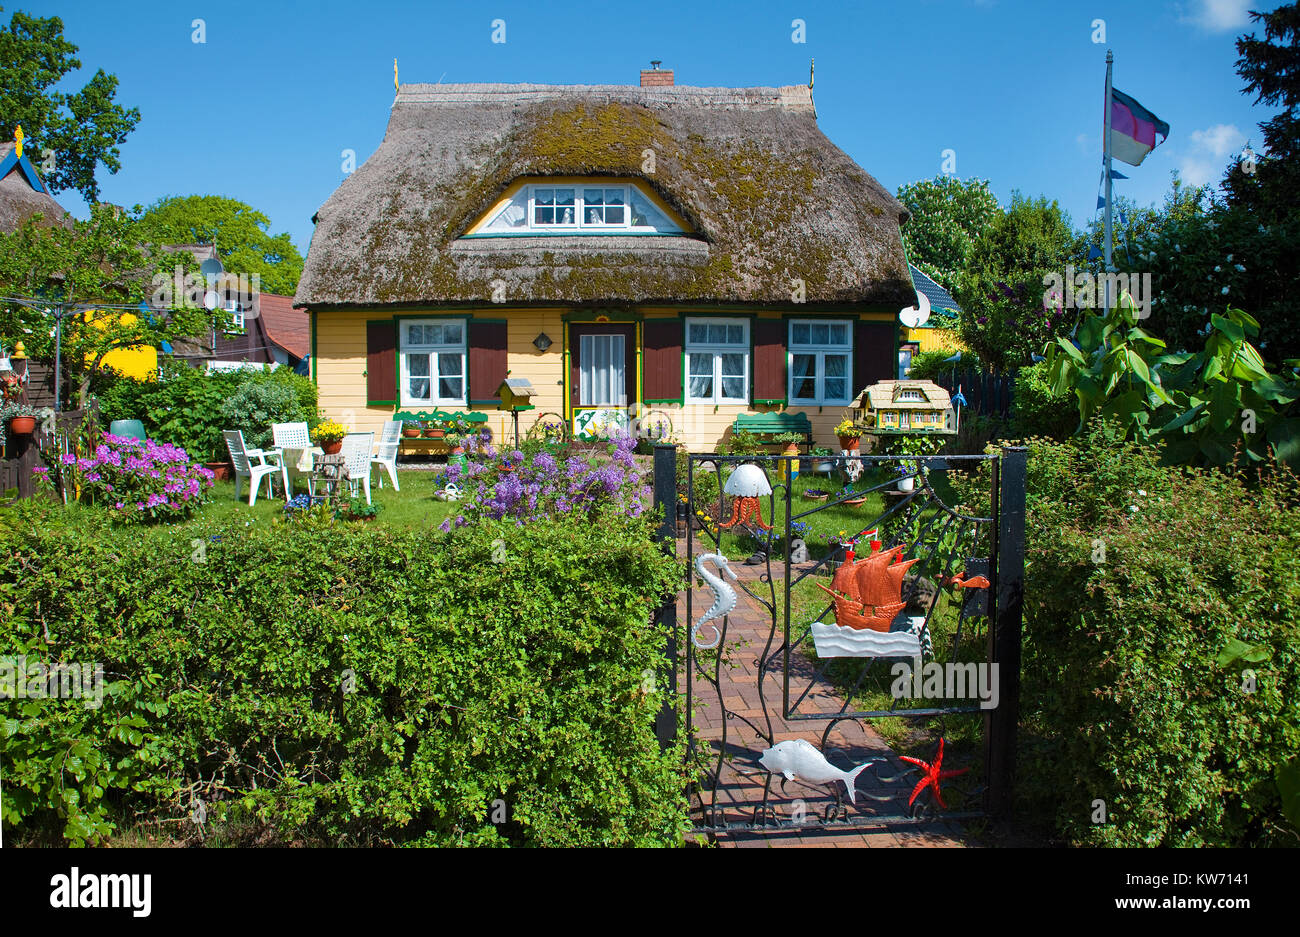 Traditional thatched-roof house at the village Born at Darss, Fischland, Mecklenburg-Western Pomerania, Baltic sea, Germany, Europe Stock Photo